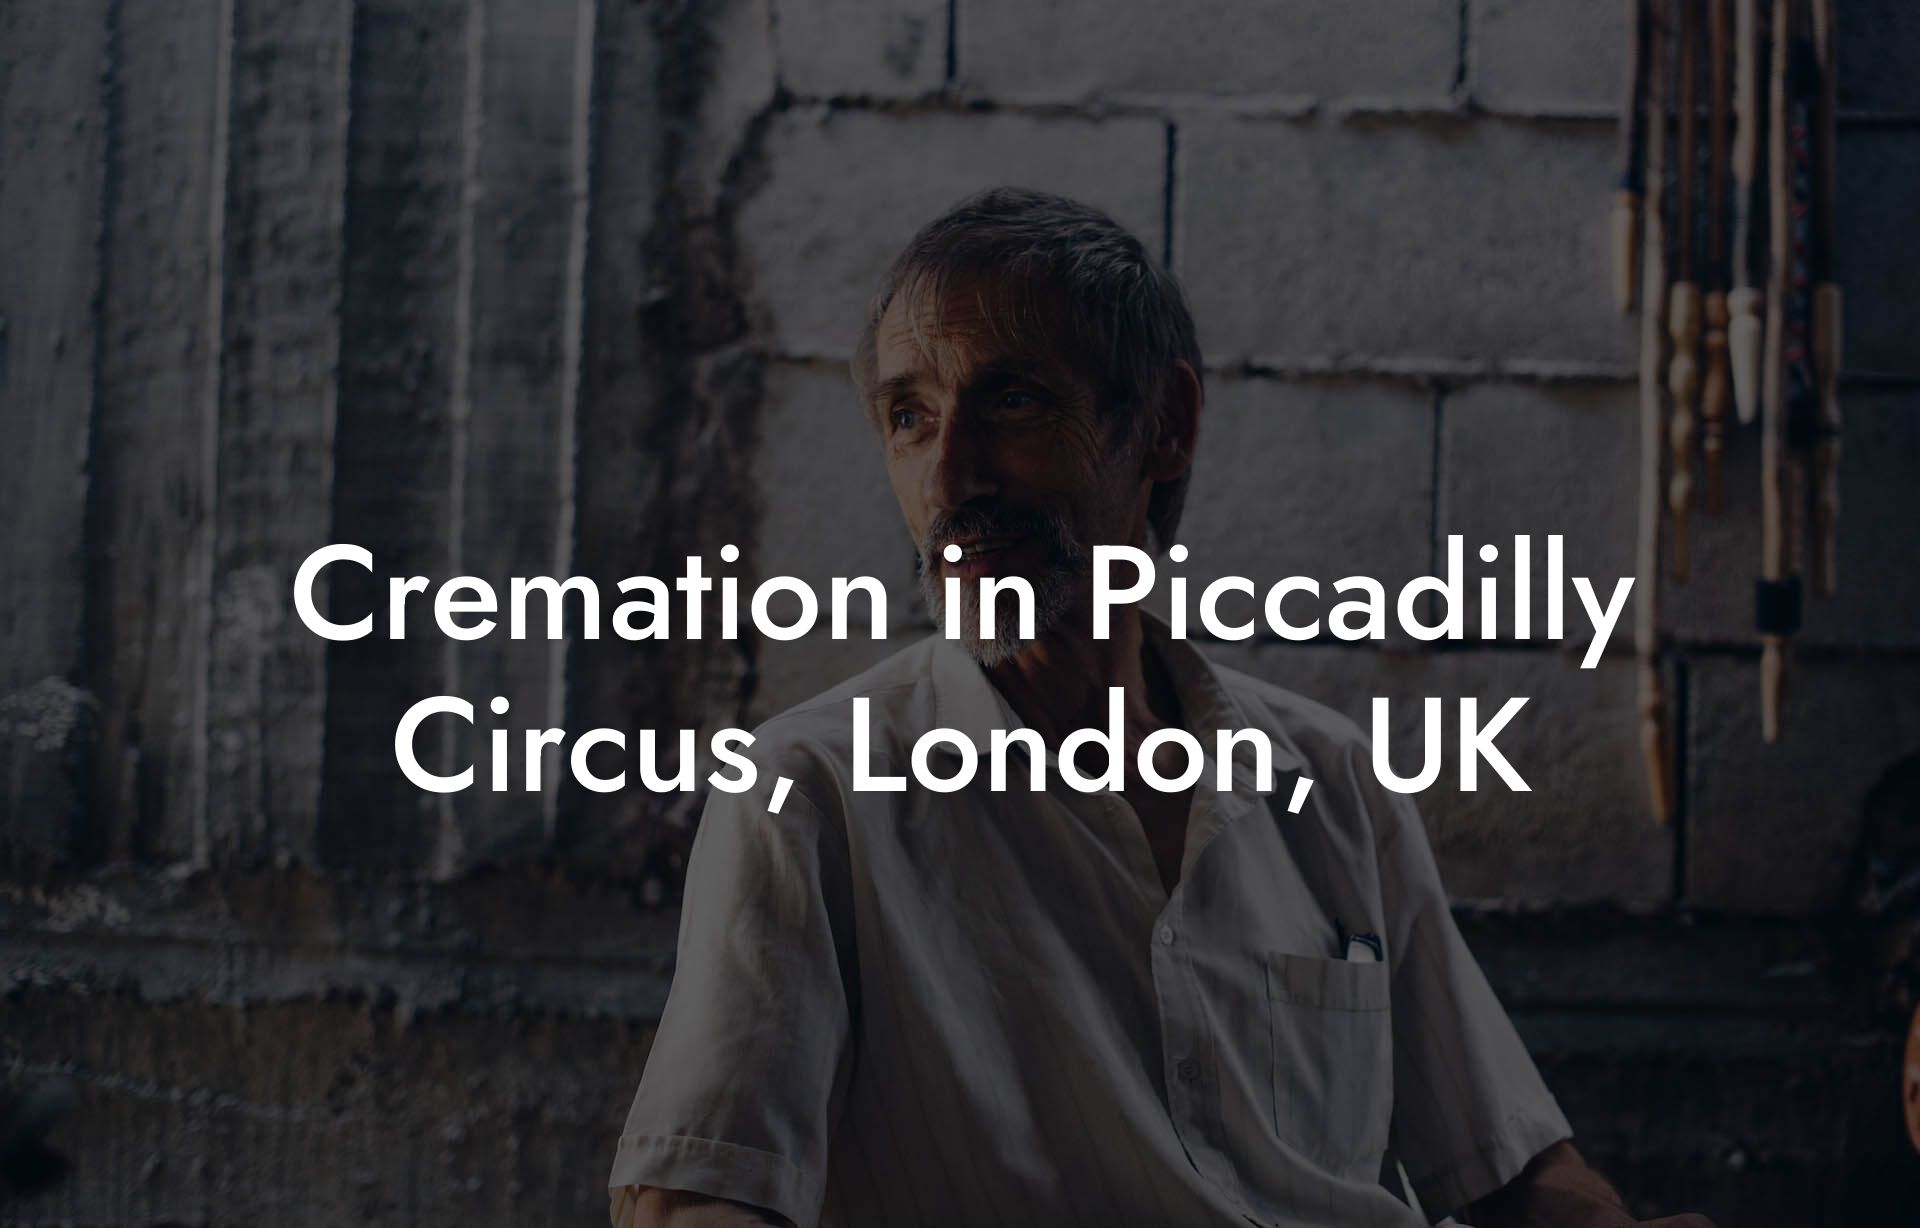 Cremation in Piccadilly Circus, London, UK